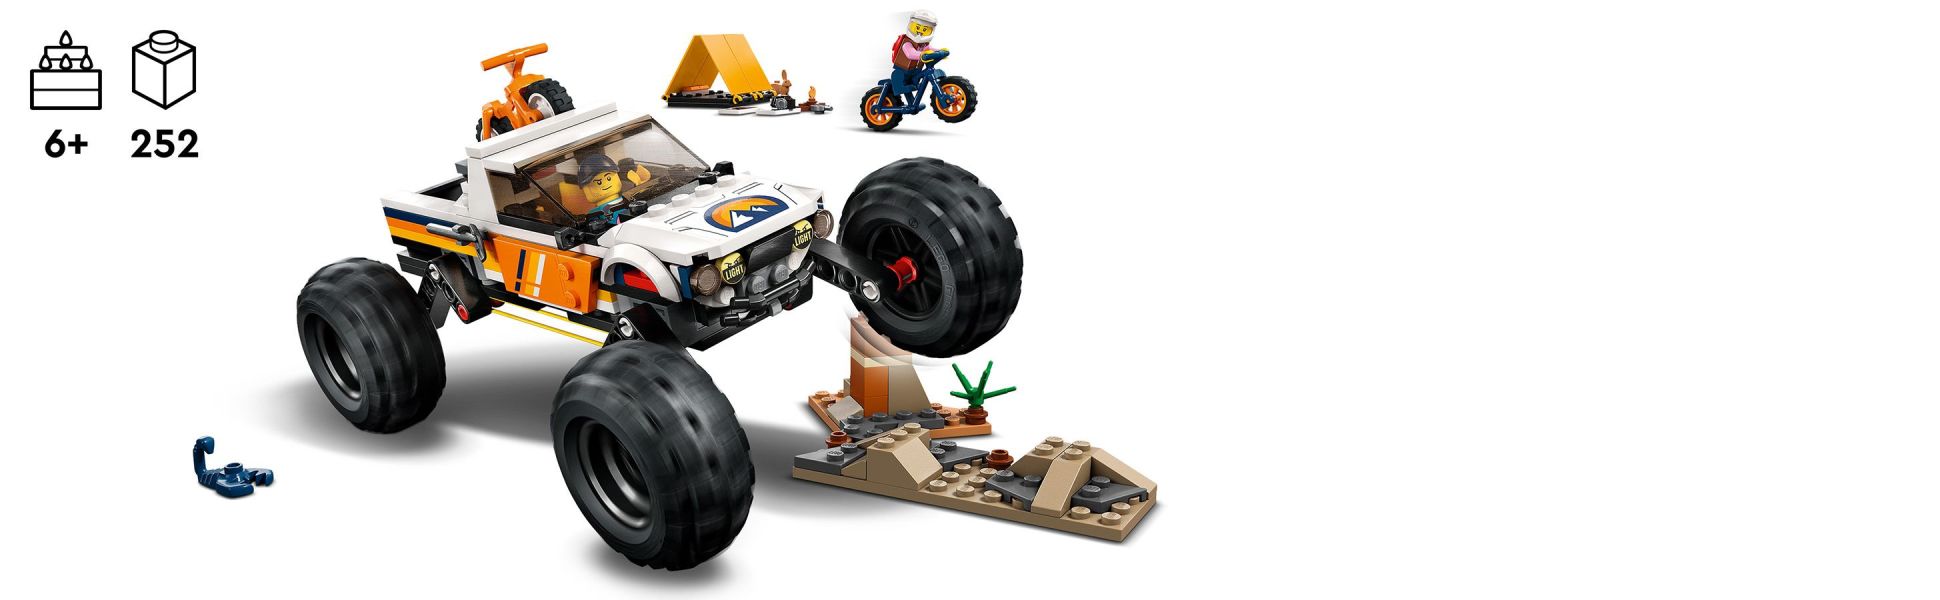 with 2 Truck Kids Style Toy Mountain Minifigures, Adventures Off-Roader Toy Bikes, Ages 6+ Monster City Working Suspension 60387 - LEGO Building Car and Set for Including 4x4 Camping Vehicle